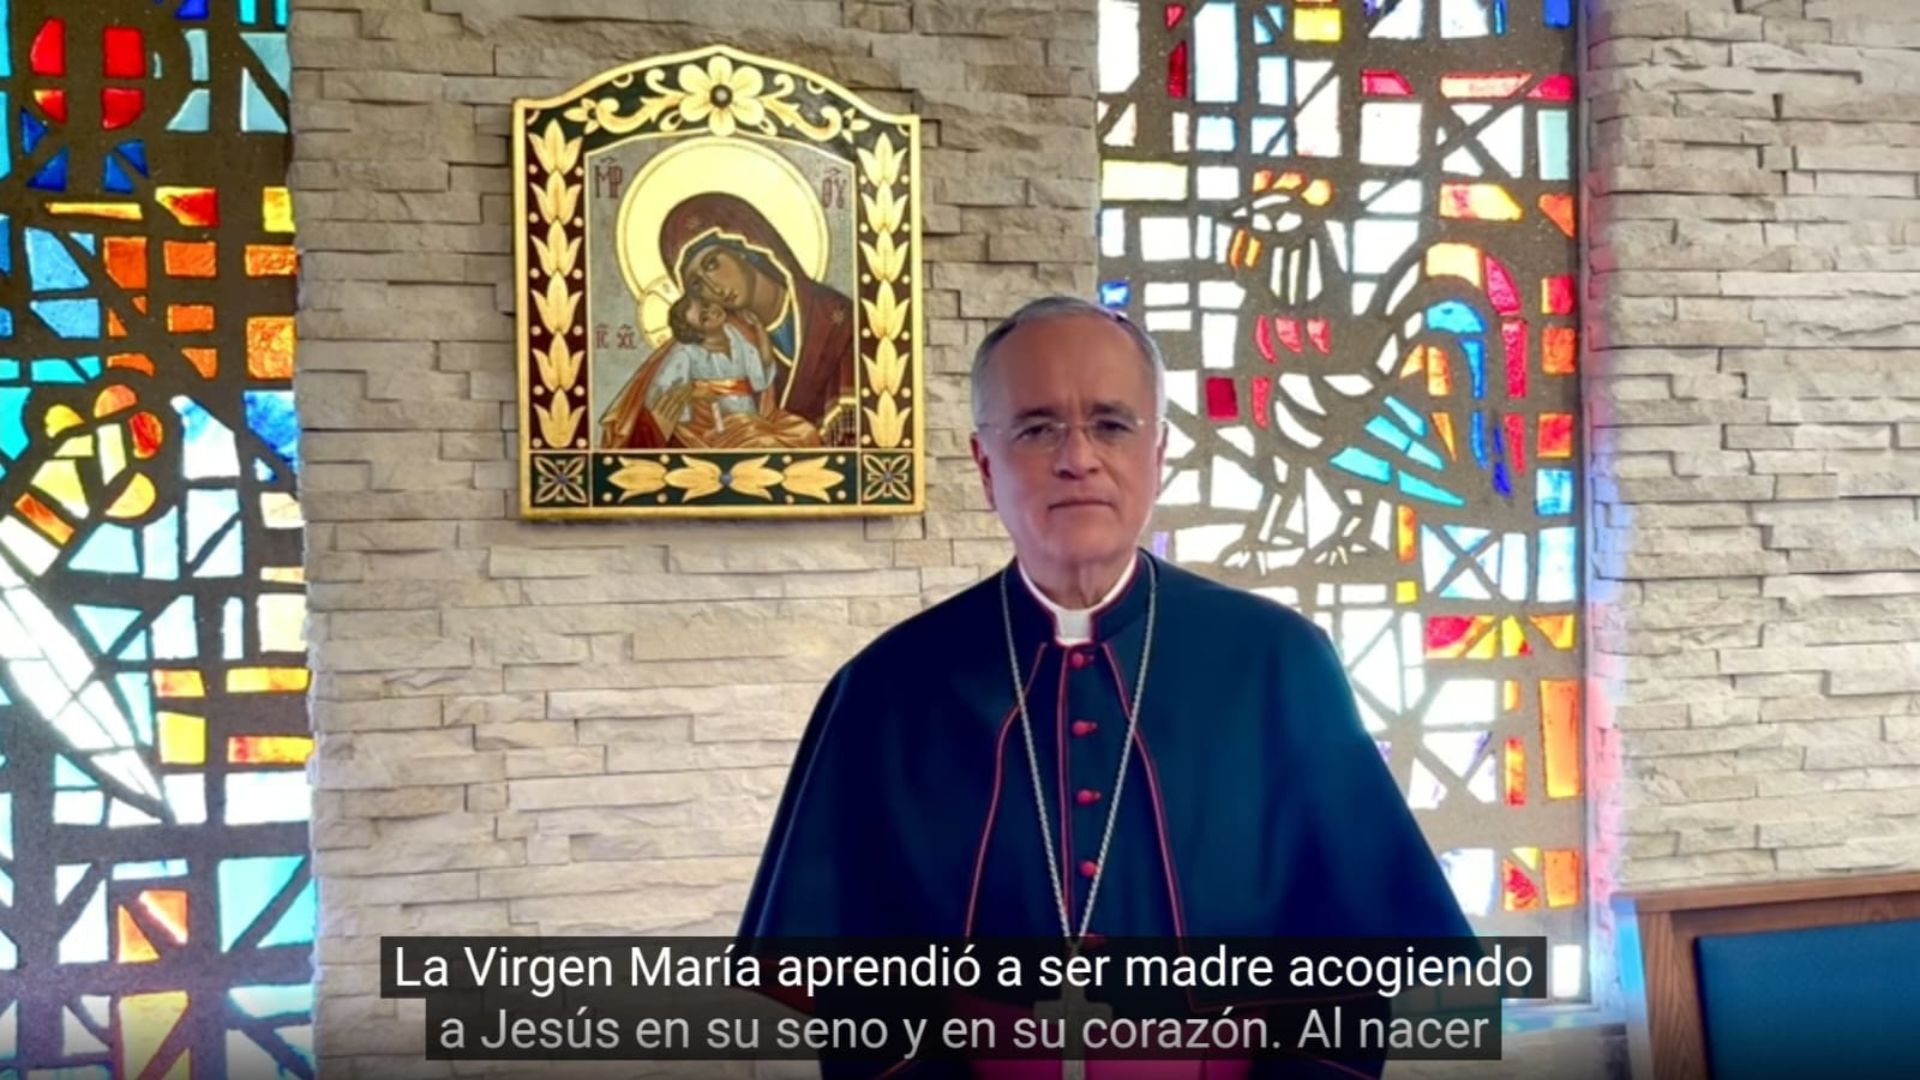 Monsignor Báez: "Let us not allow ourselves to be taken away from us the last of our freedoms, the freedom to believe"